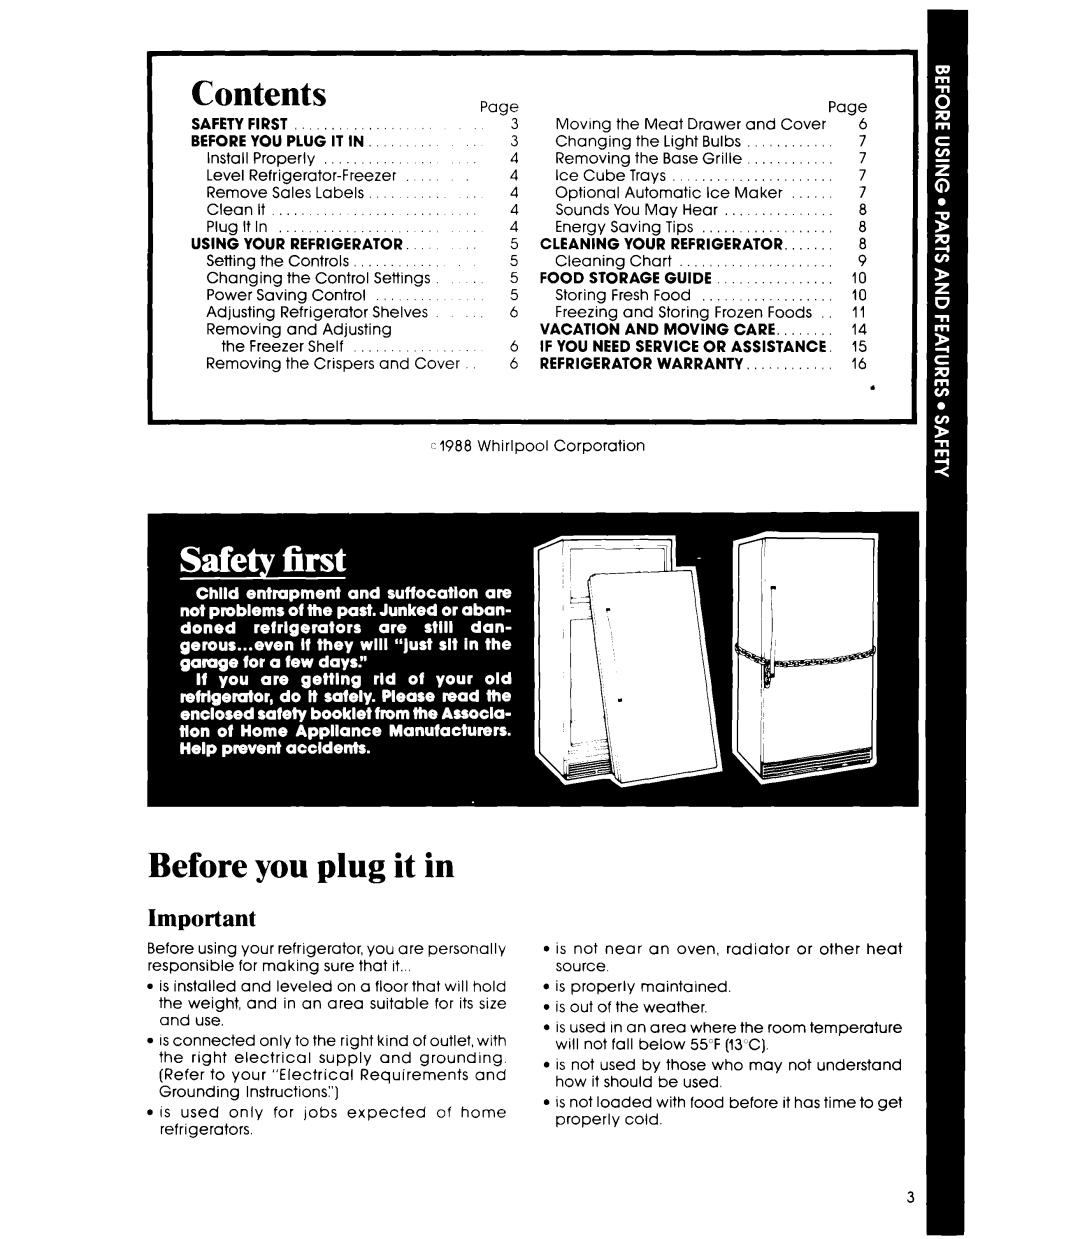 Whirlpool ET20AK manual Contents, Before you plug it in 